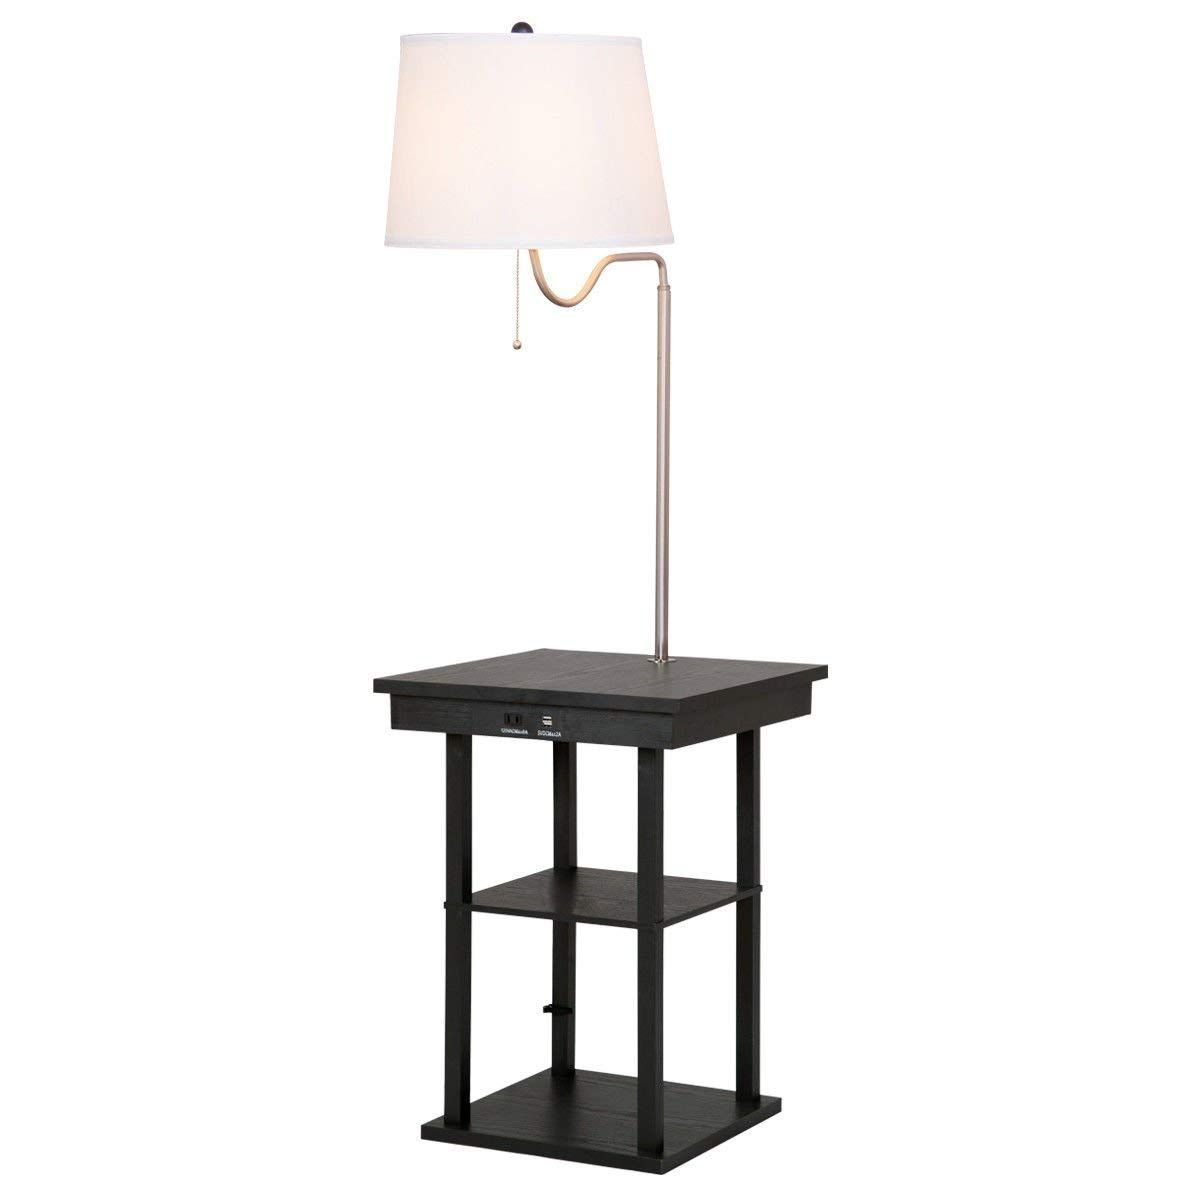 Table Swing Arm Floor Lamp With Shade 2 Usb Ports In 2019 intended for size 1200 X 1200